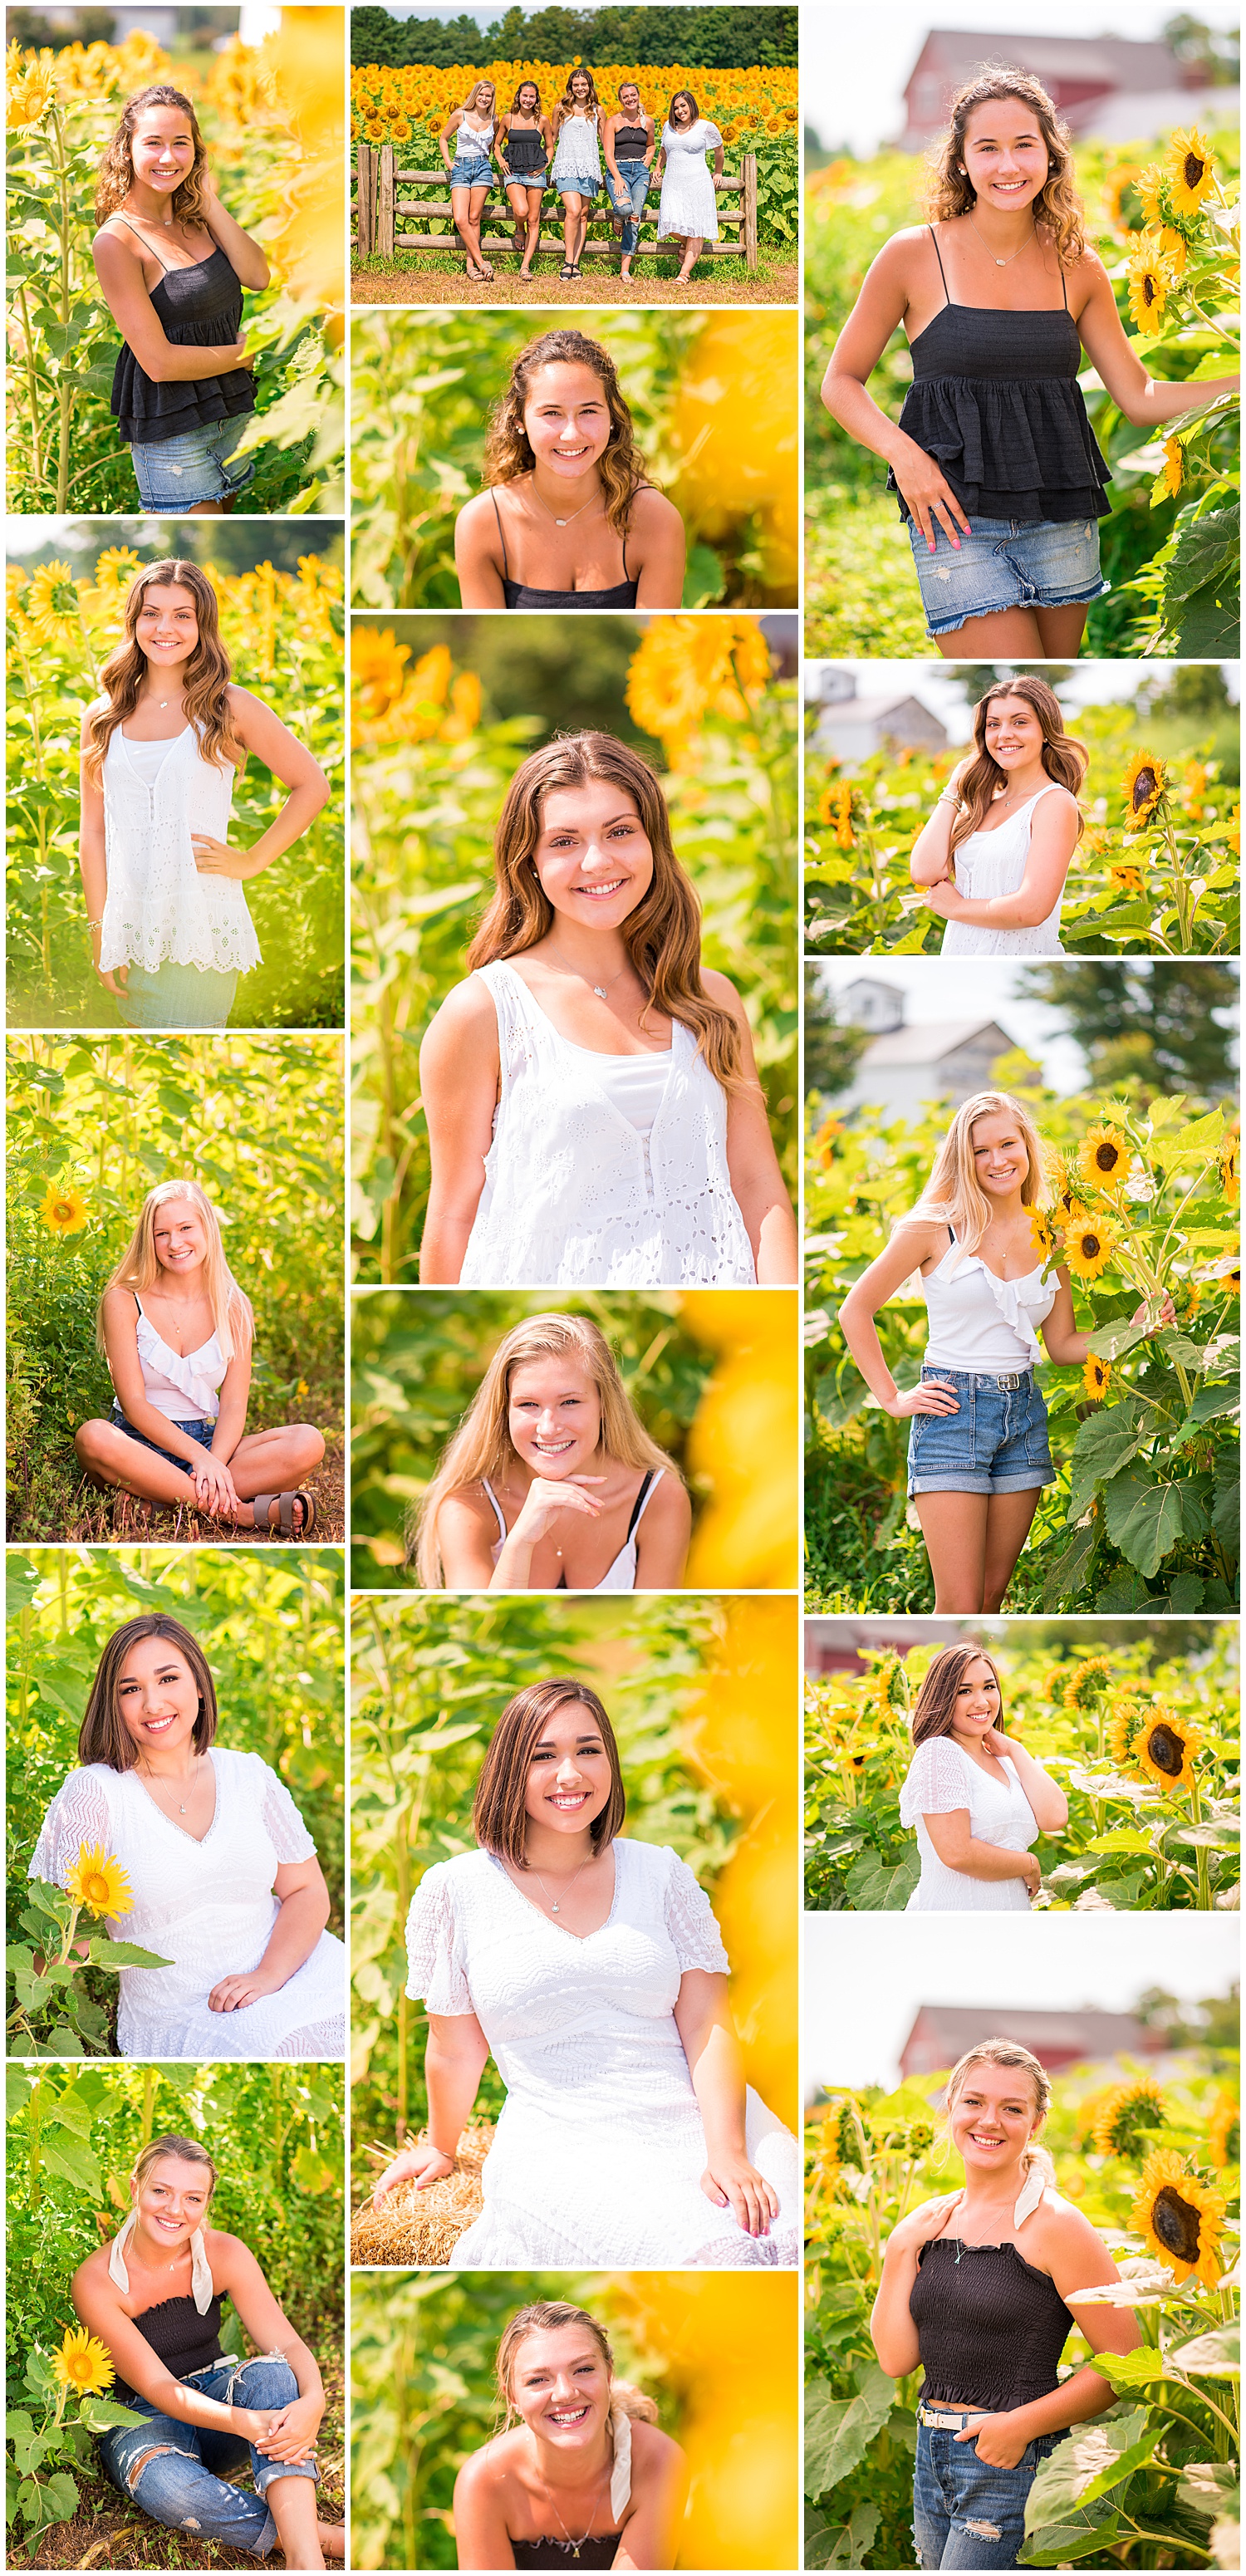 images from photoshoot with senior spokesmodels at sunflower festival